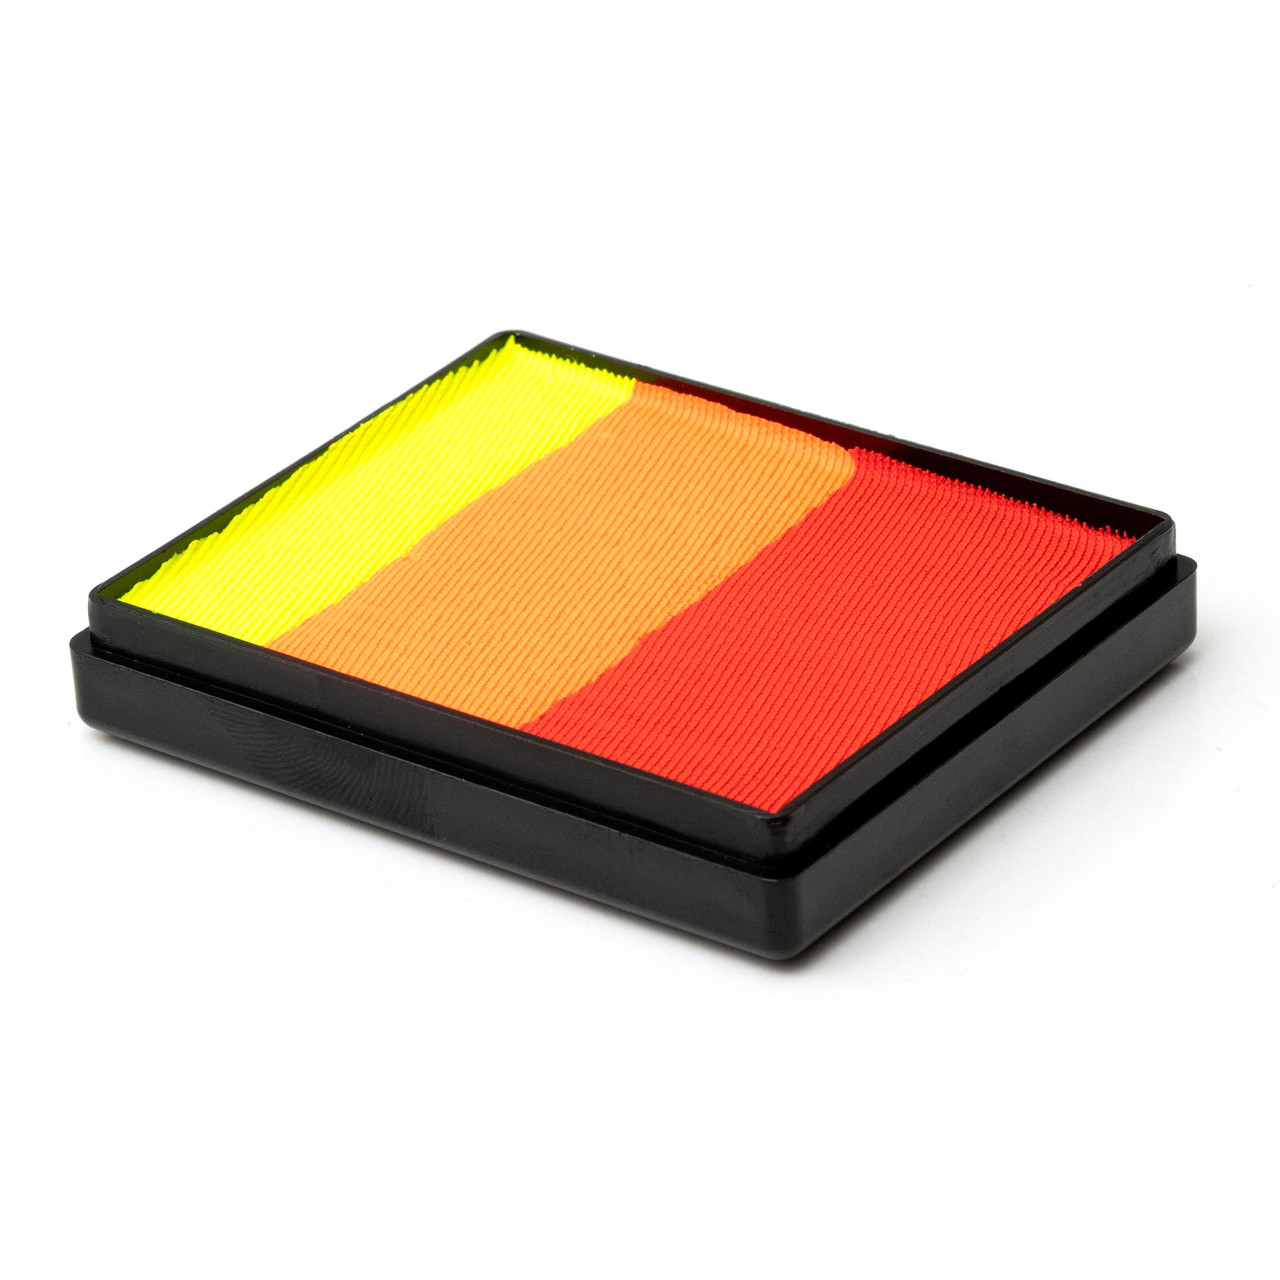 Brightest Tiger- 50g Magnetic Global Rainbow Cake